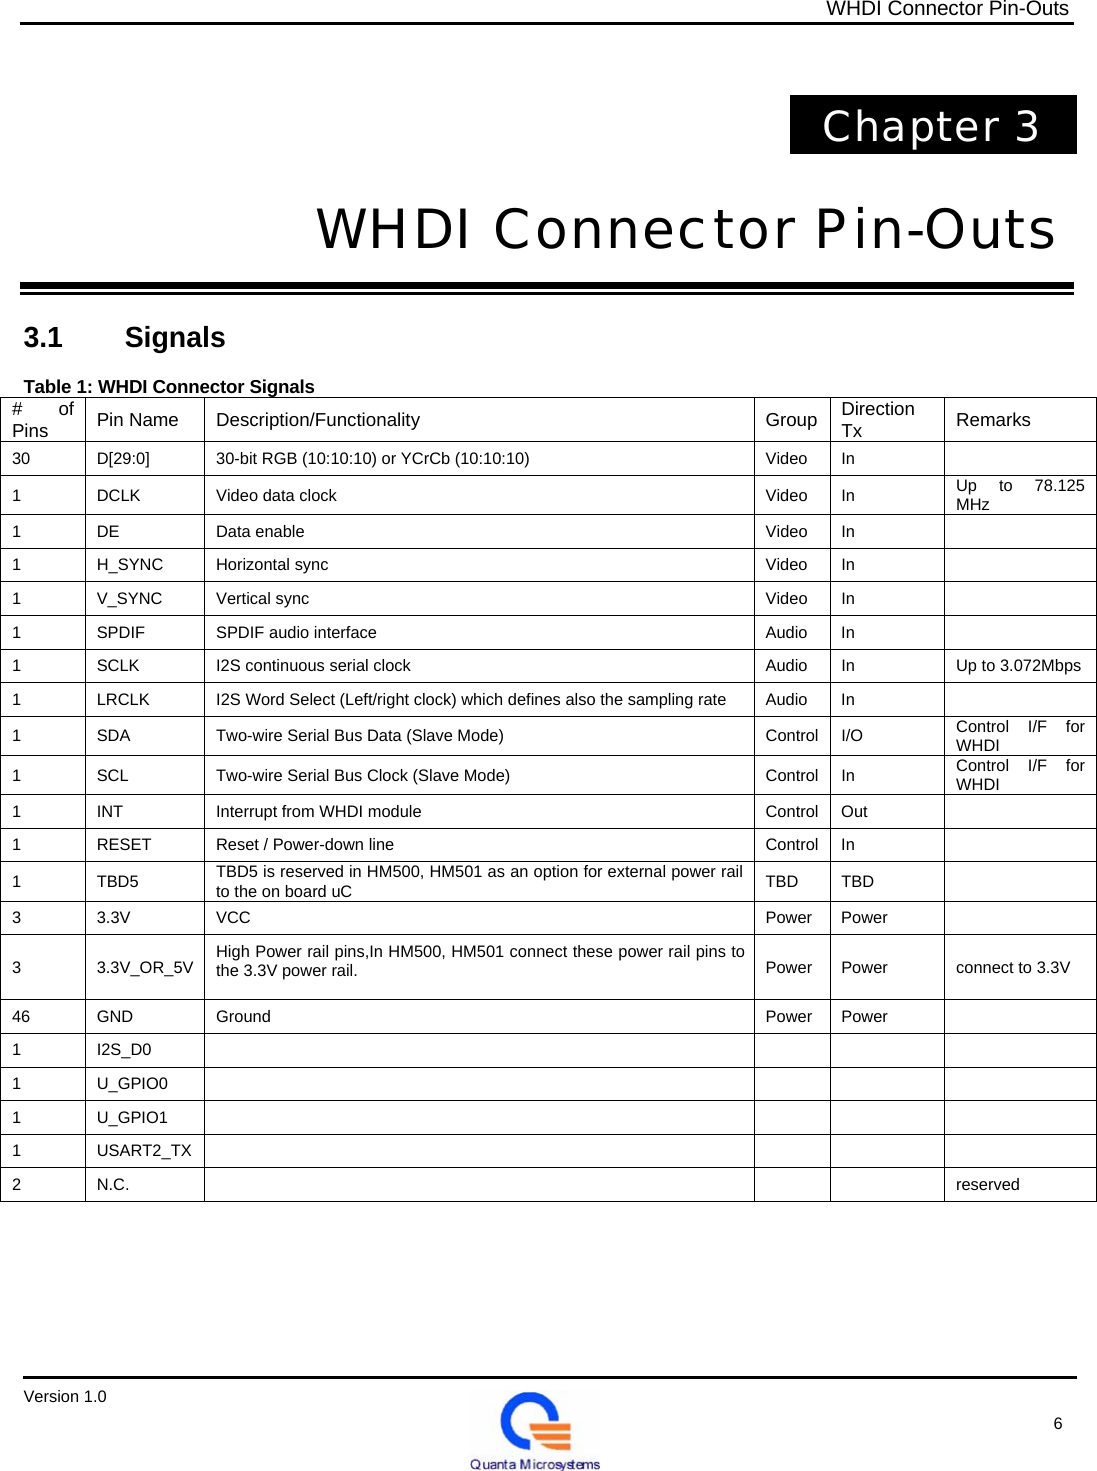   WHDI Connector Pin-Outs     Chapter 3    WHDI Connector Pin-Outs    3.1    Signals  Table 1: WHDI Connector Signals # of Pins  Pin Name  Description/Functionality  Group  Direction Tx  Remarks 30  D[29:0]  30-bit RGB (10:10:10) or YCrCb (10:10:10)  Video  In   1  DCLK  Video data clock  Video  In  Up to 78.125 MHz 1 DE  Data enable  Video In   1 H_SYNC Horizontal sync  Video In   1 V_SYNC Vertical sync  Video In   1  SPDIF  SPDIF audio interface  Audio  In   1  SCLK  I2S continuous serial clock  Audio  In  Up to 3.072Mbps1  LRCLK  I2S Word Select (Left/right clock) which defines also the sampling rate  Audio  In   1  SDA  Two-wire Serial Bus Data (Slave Mode)  Control  I/O  Control I/F for WHDI 1  SCL  Two-wire Serial Bus Clock (Slave Mode)  Control  In  Control I/F for WHDI 1  INT  Interrupt from WHDI module  Control  Out   1  RESET  Reset / Power-down line  Control  In   1 TBD5 TBD5 is reserved in HM500, HM501 as an option for external power rail to the on board uC  TBD TBD   3 3.3V  VCC  Power Power  3 3.3V_OR_5V High Power rail pins,In HM500, HM501 connect these power rail pins to the 3.3V power rail.  Power  Power  connect to 3.3V 46 GND  Ground  Power Power  1  I2S_D0       1  U_GPIO0       1  U_GPIO1       1  USART2_TX       2  N.C.     reserved        Version 1.0                                                                                                   6 